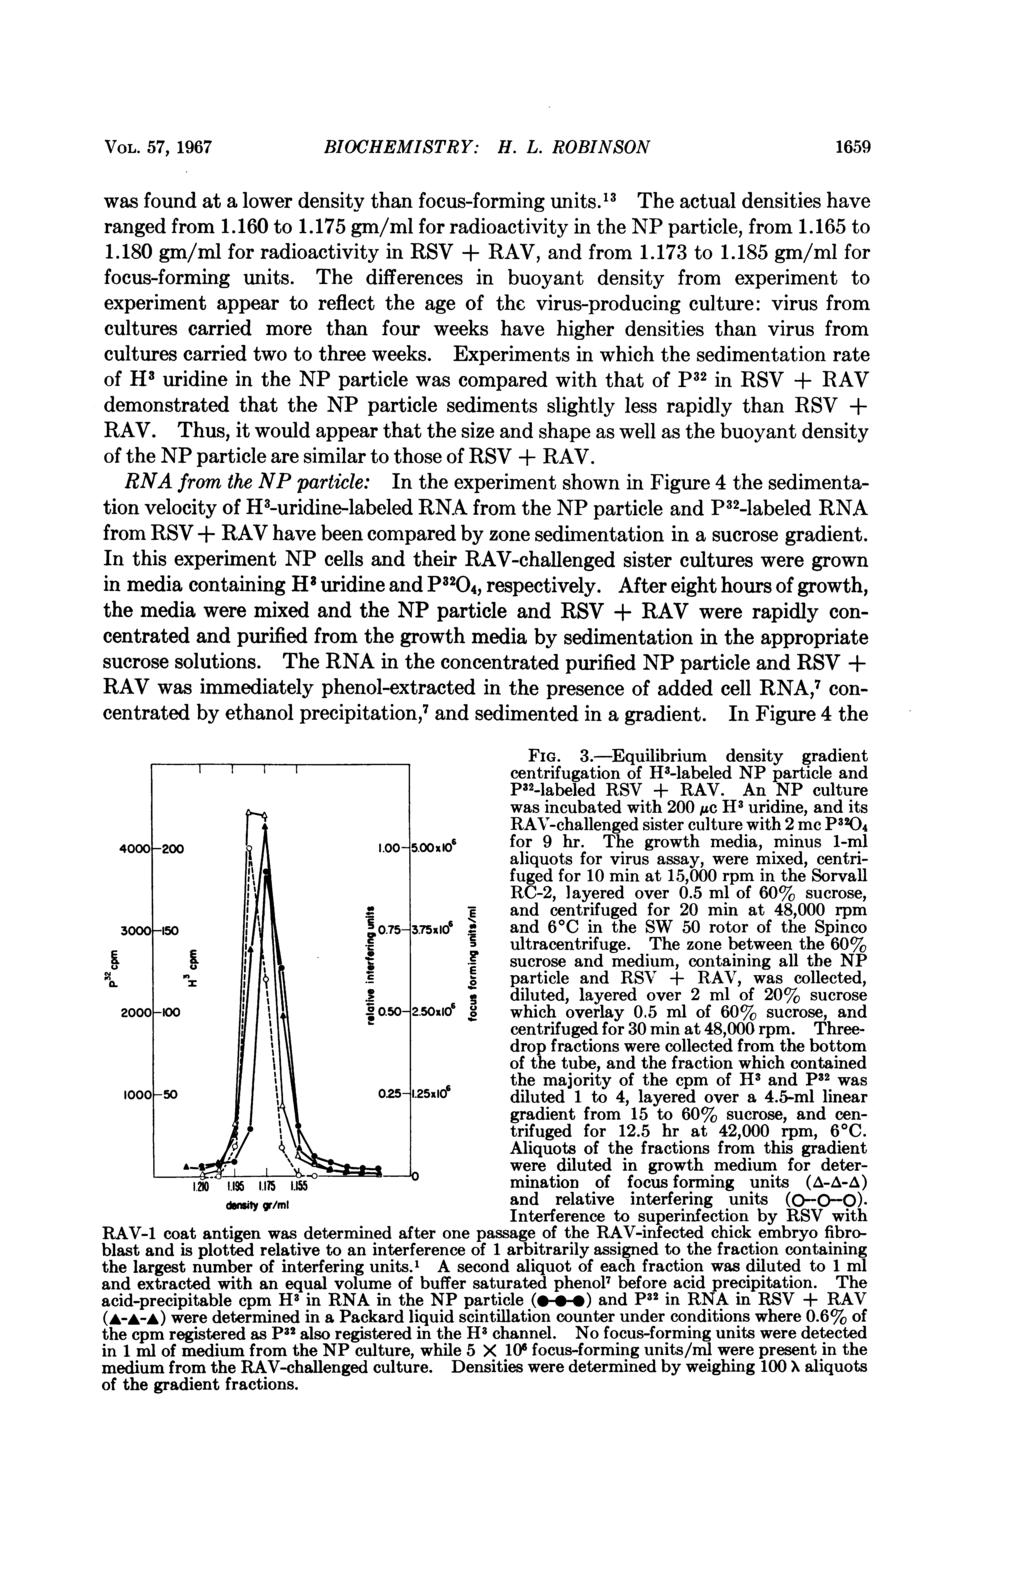 VOL. 57, 1967 BIOCHEMISTRY: H. L. ROBINSON 1659 was found at a lower density than focus-forming units.'3 The actual densities have ranged from 1.160 to 1.